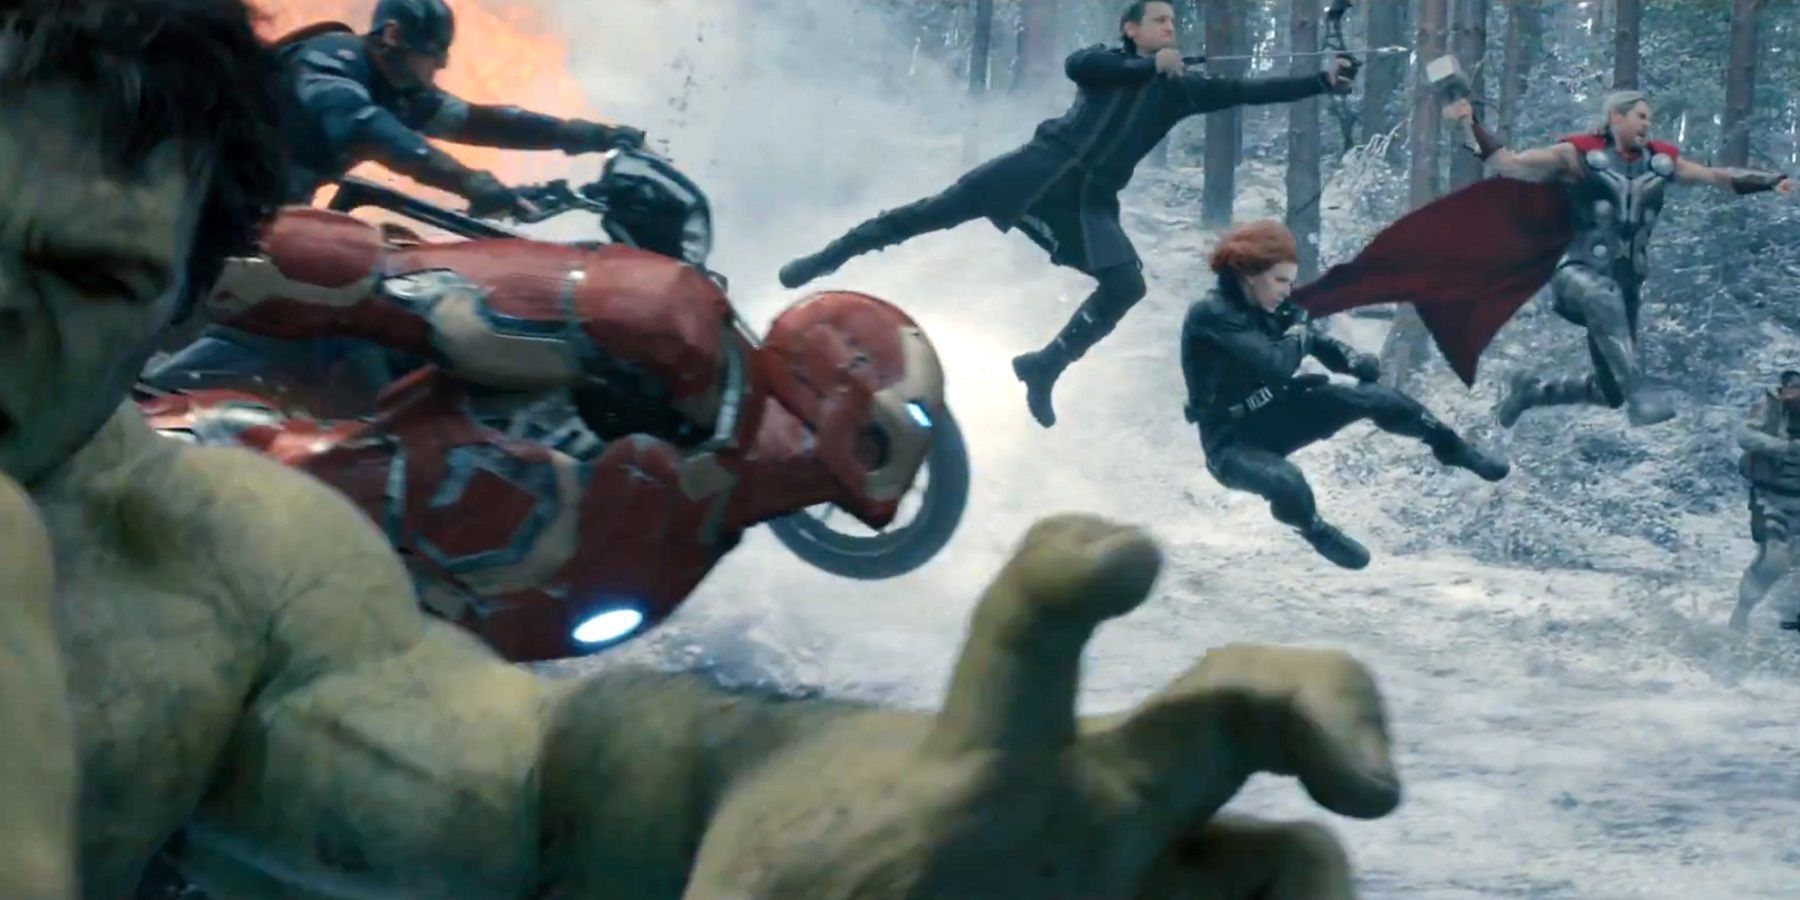 The Avengers leaping into battle in Age of Ultron's opening scene